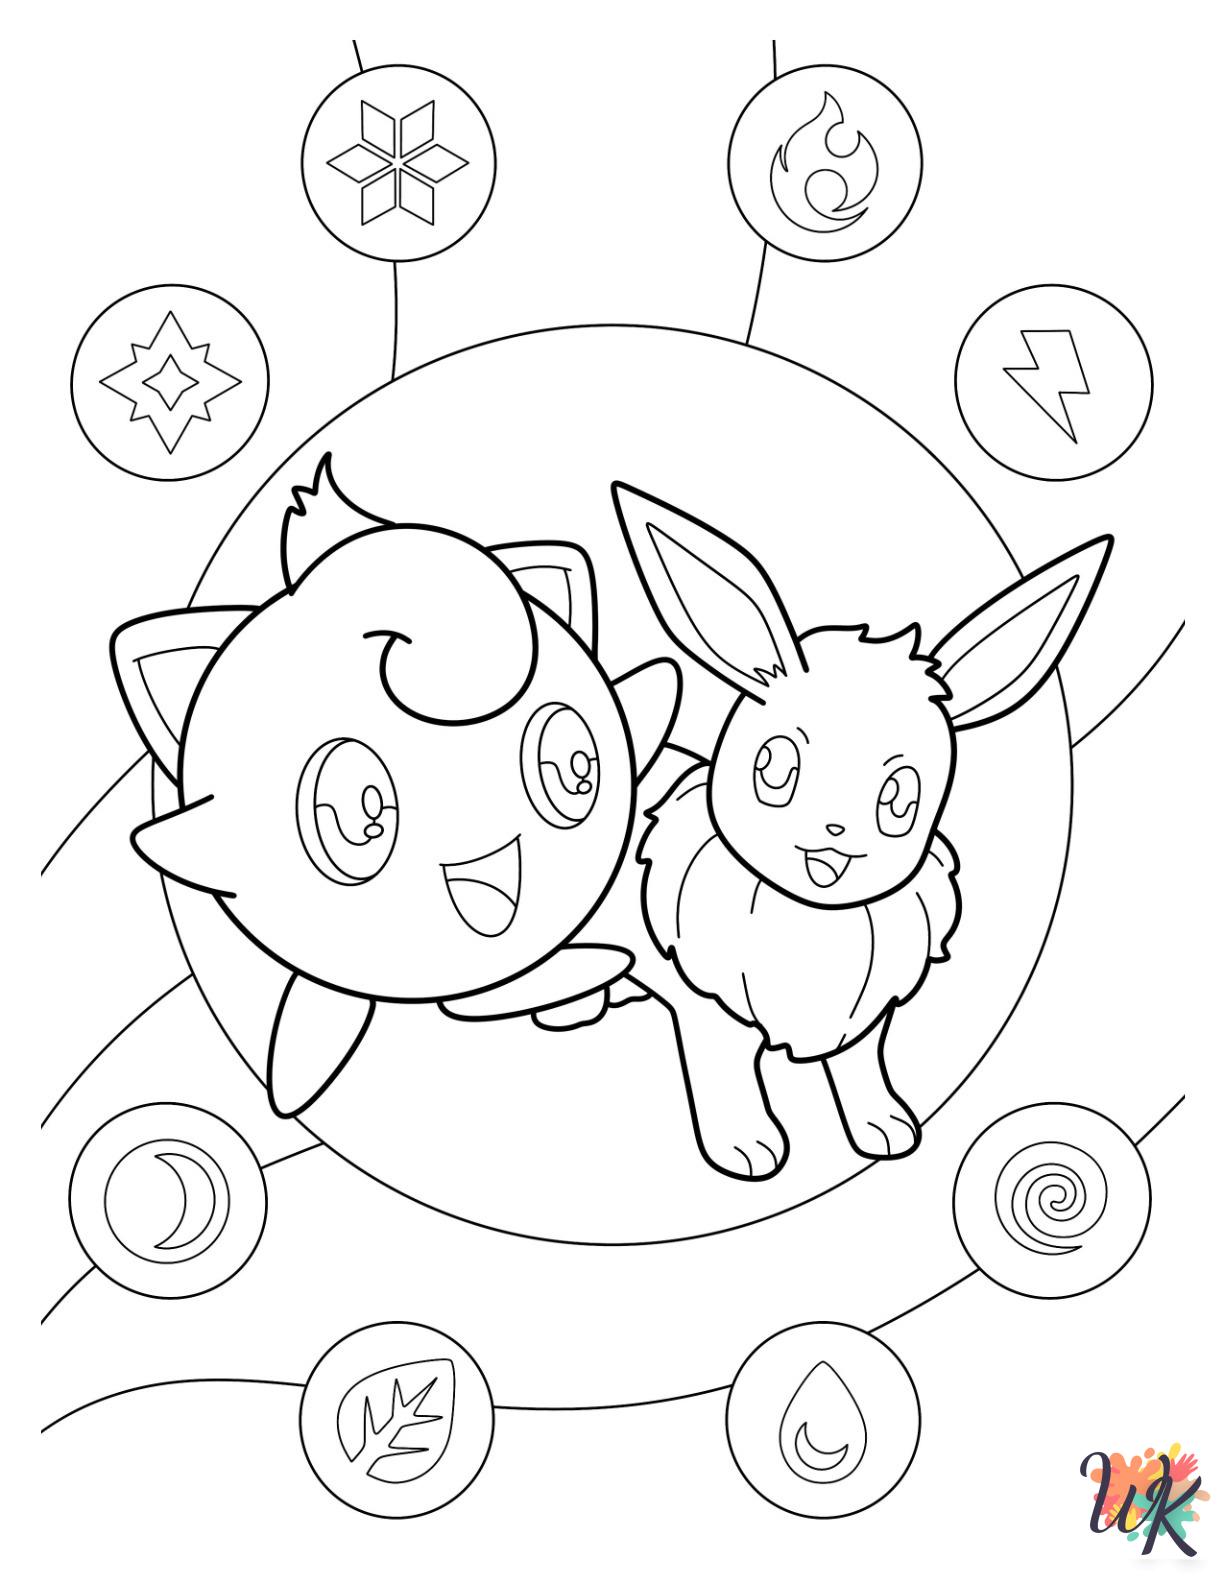 Jigglypuff coloring pages easy